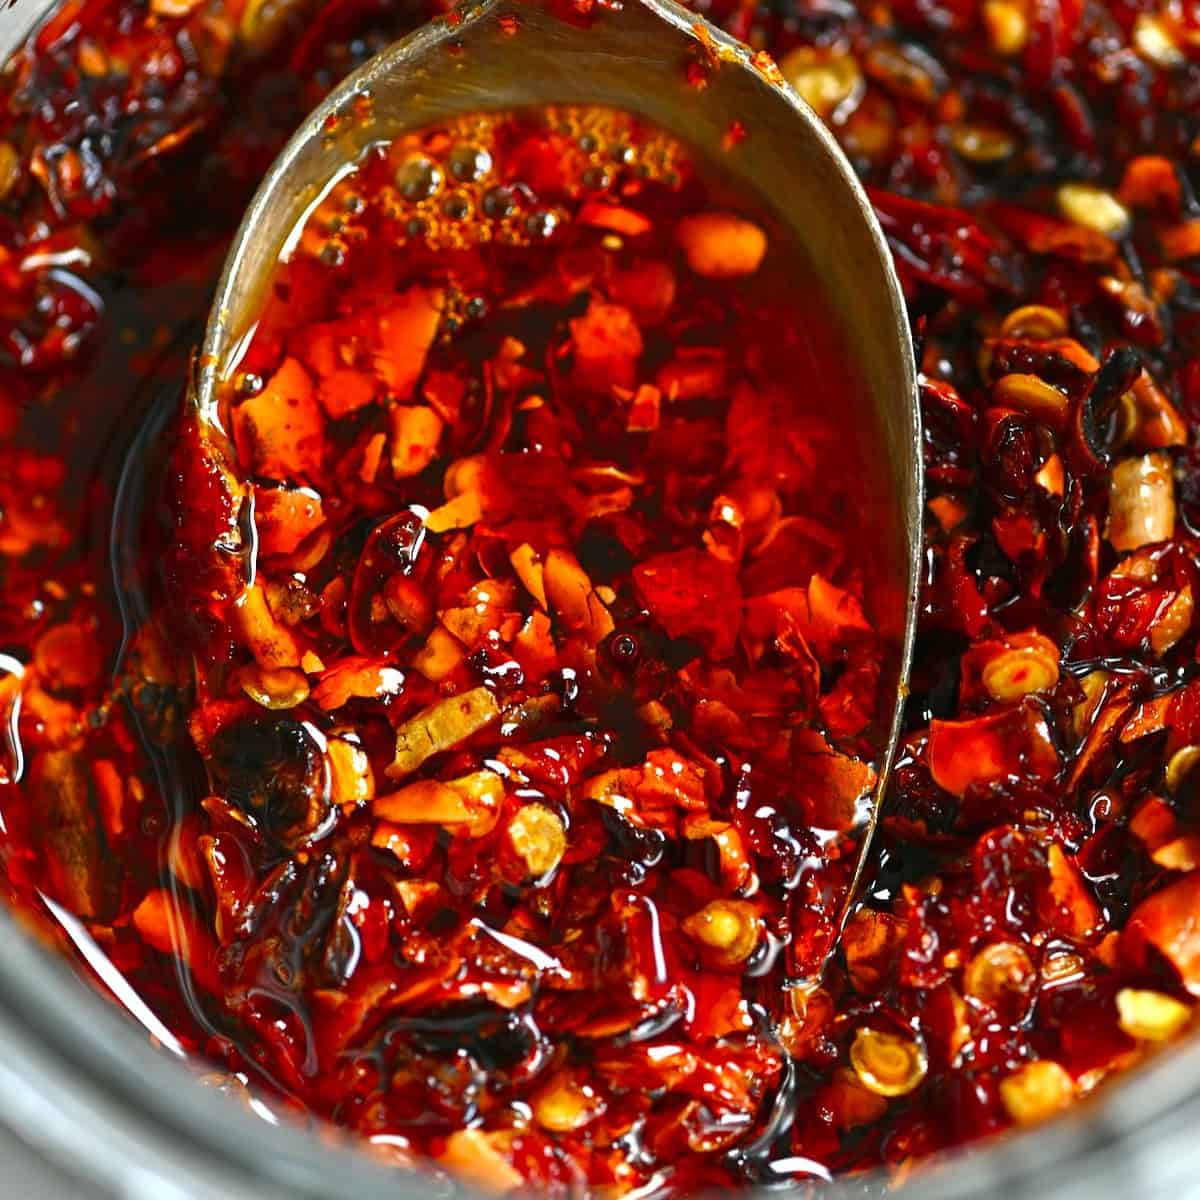 How to Make Chili Oil (+ Tips and Variations) - Alphafoodie